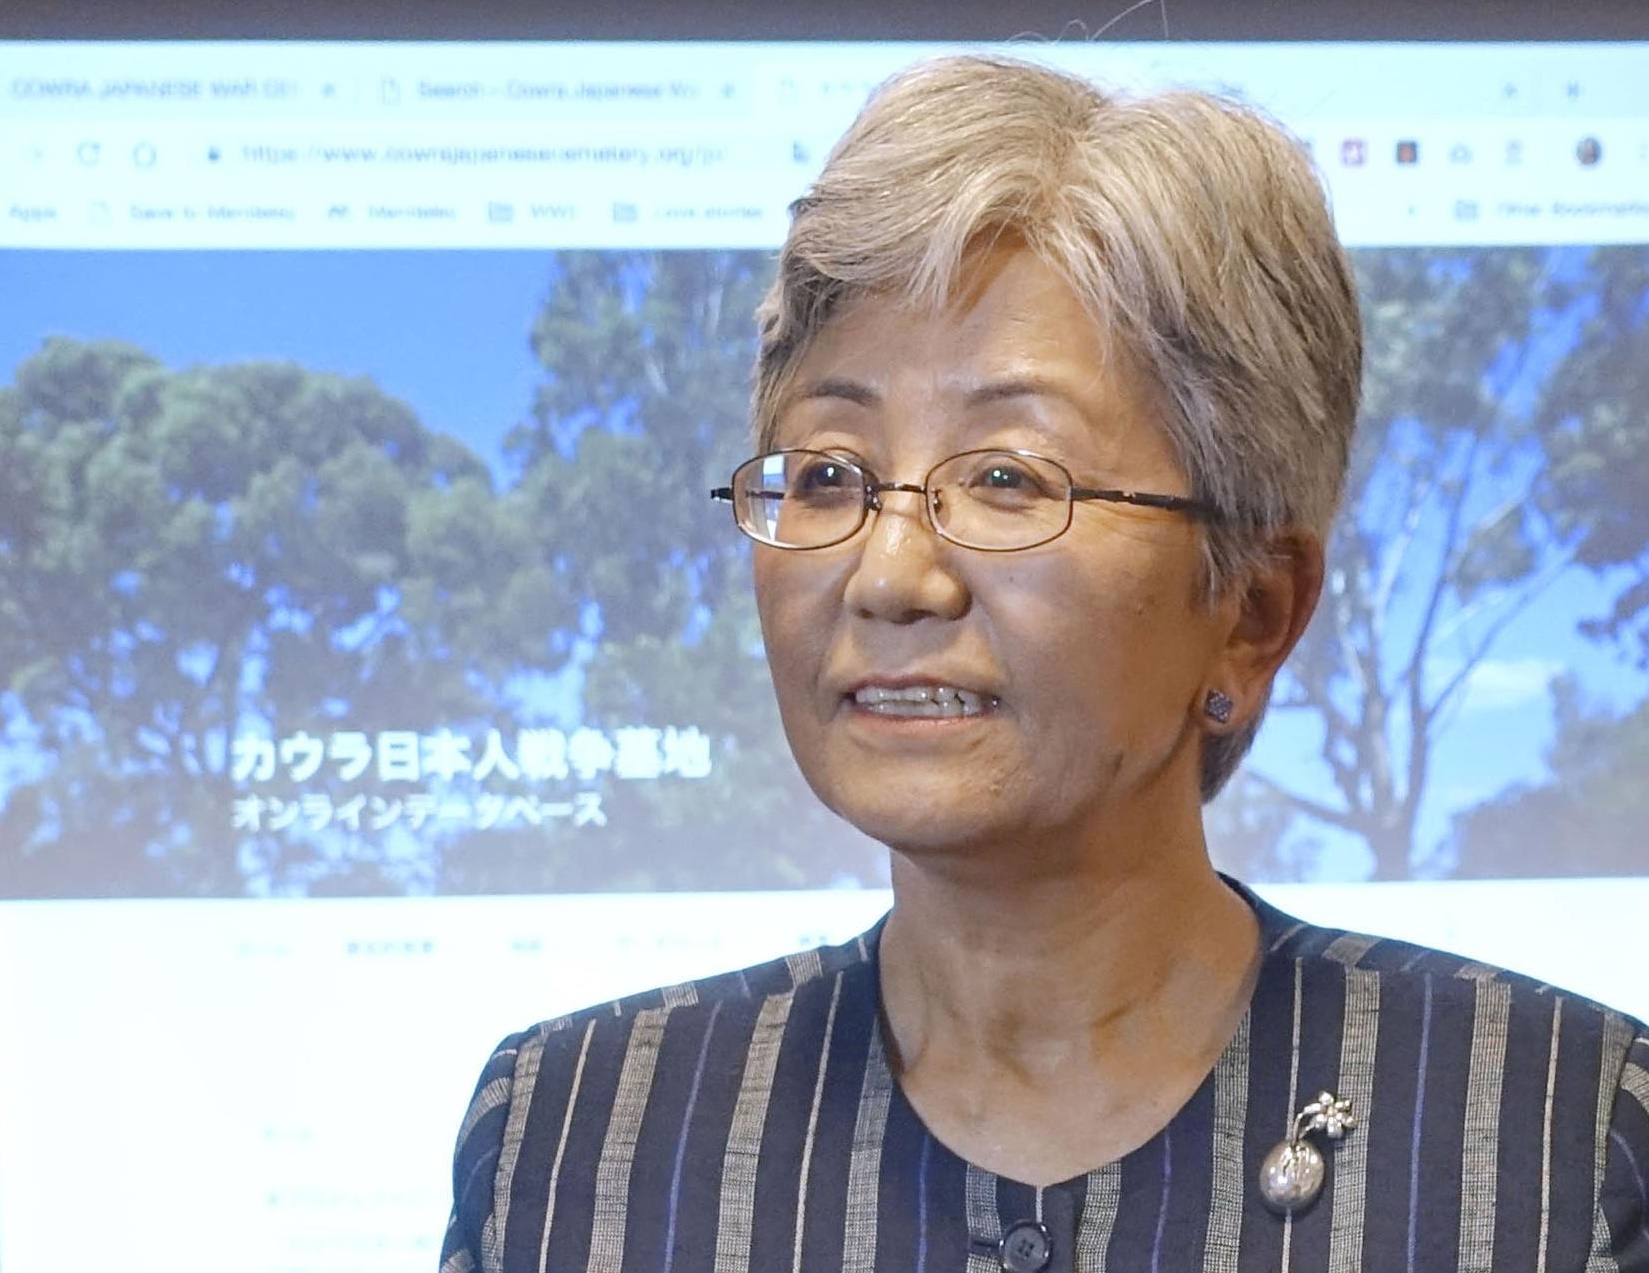 Keiko Tamura of Australian National University speaks during a news conference at the Japanese Embassy in Canberra to announce that a bilingual database of Japanese nationals who died and were buried in Australia has been created. | KYODO